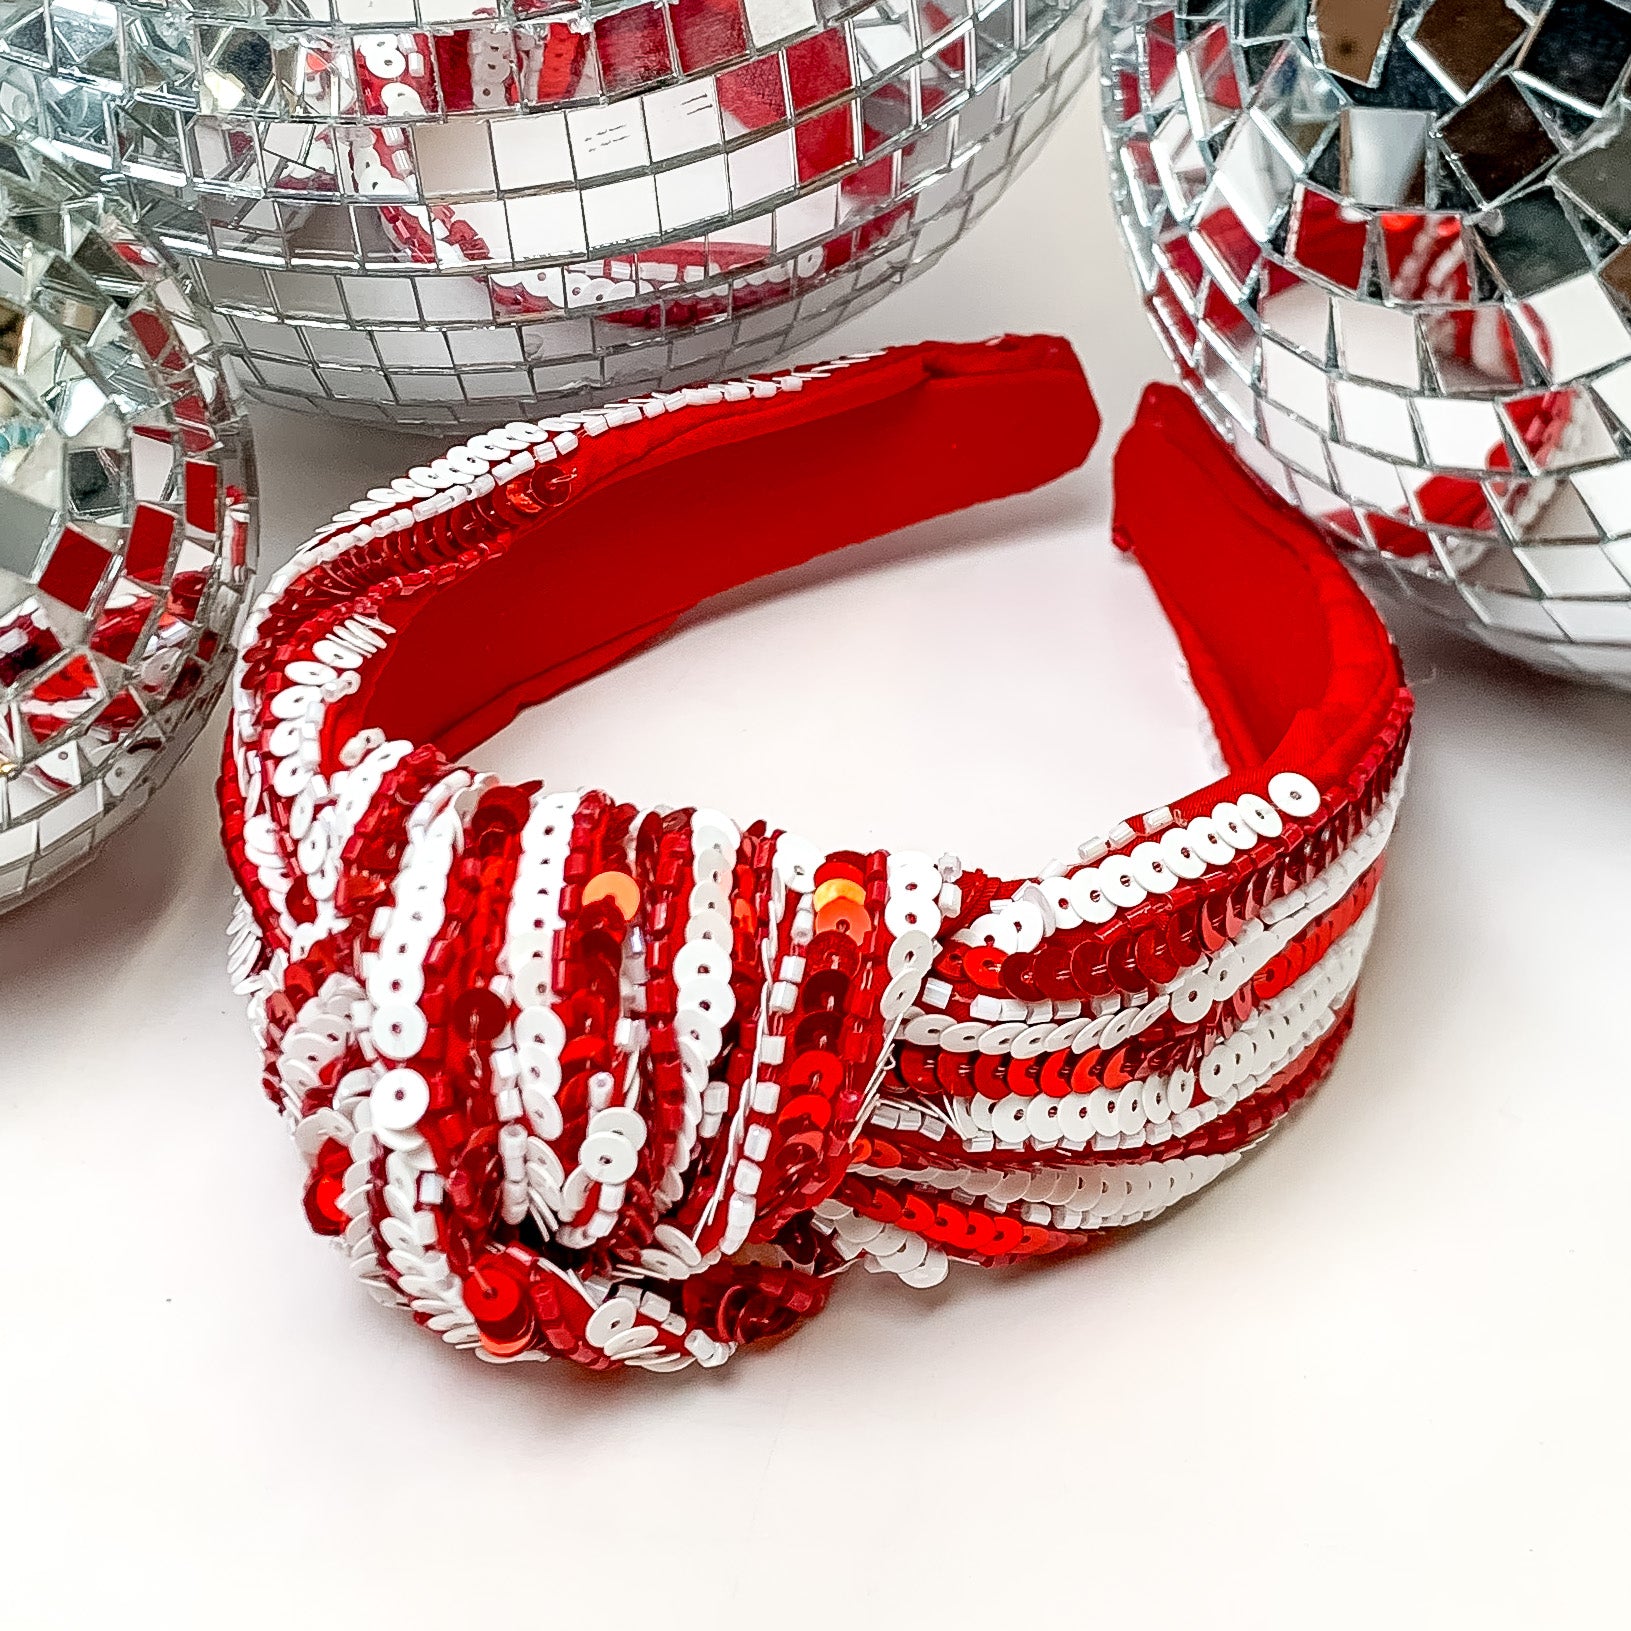 Striped Sequin Large Knot Headband in Red and White. This headband is pictured on a white background with disco balls behind the headband.